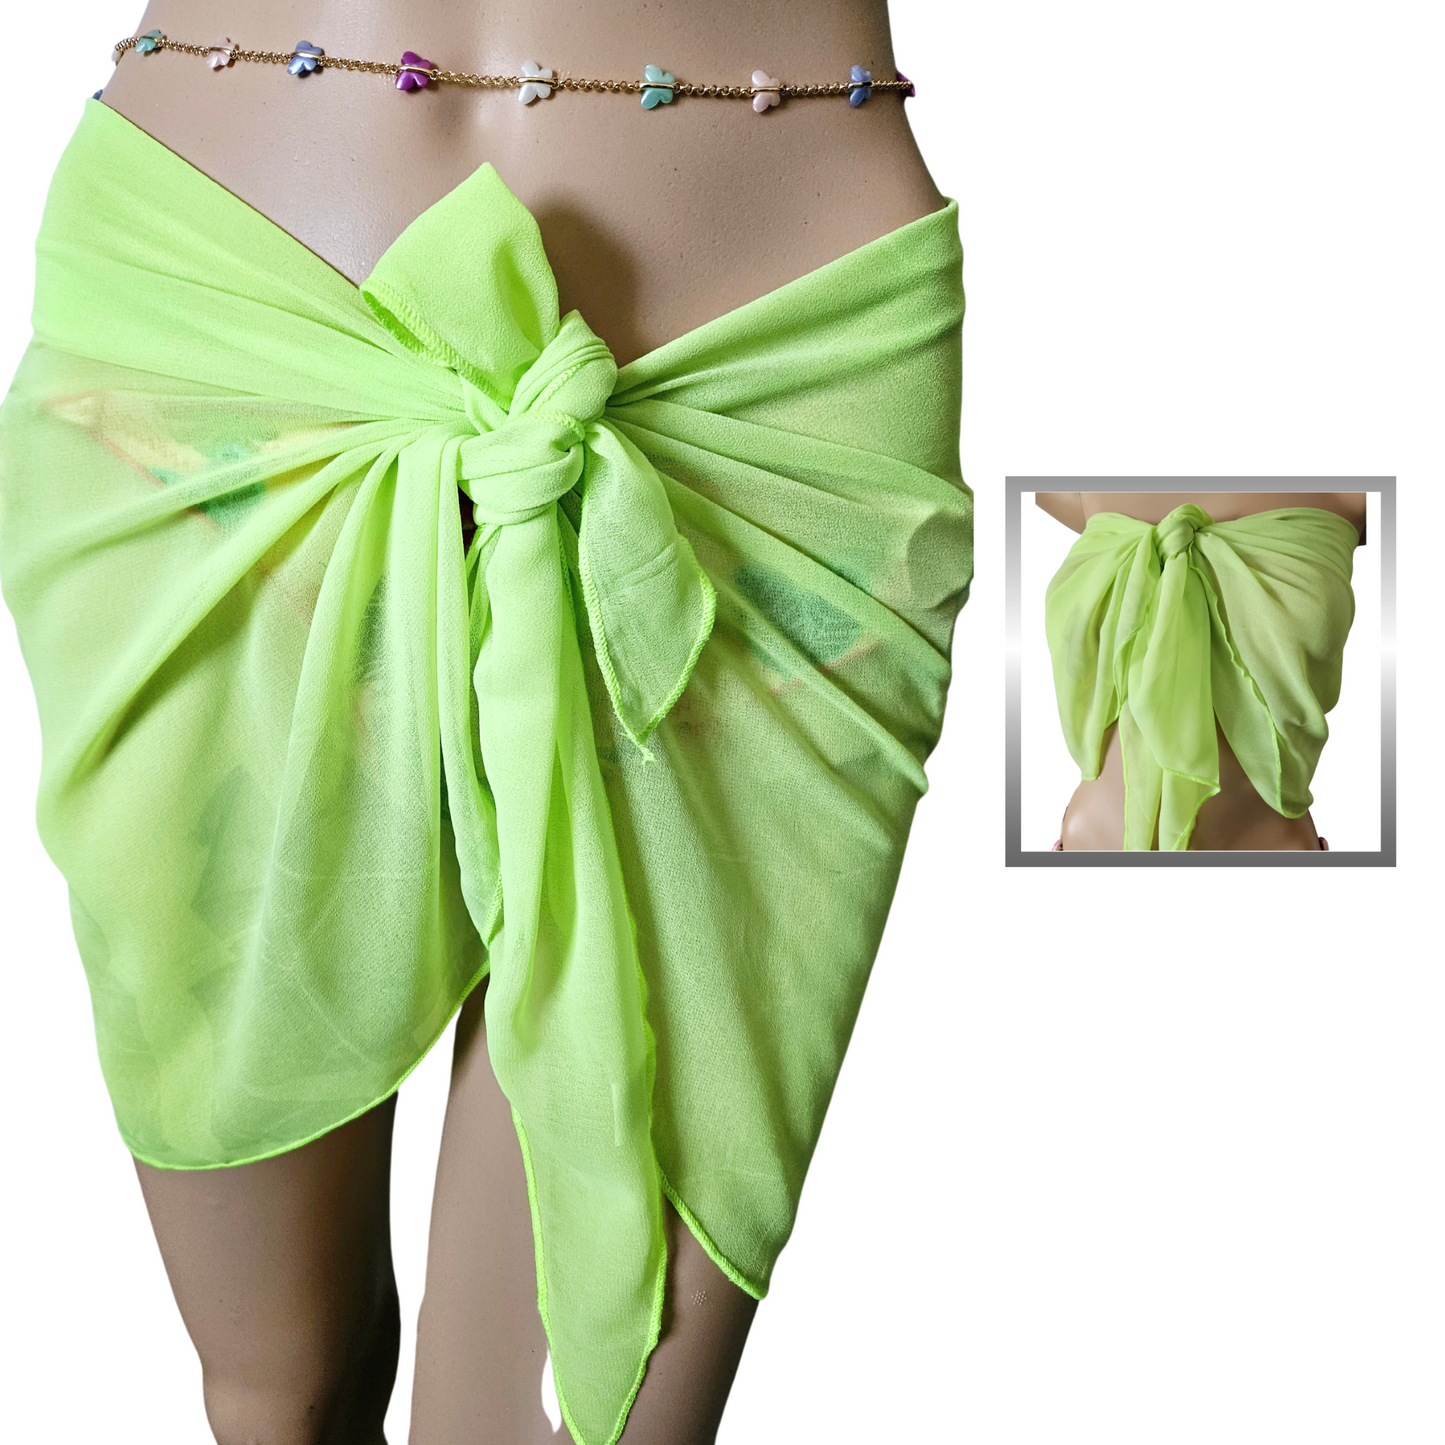 Fluorescent Green Women's Swimsuit Cover Up Sarong Cover-Ups Wrap Skirt